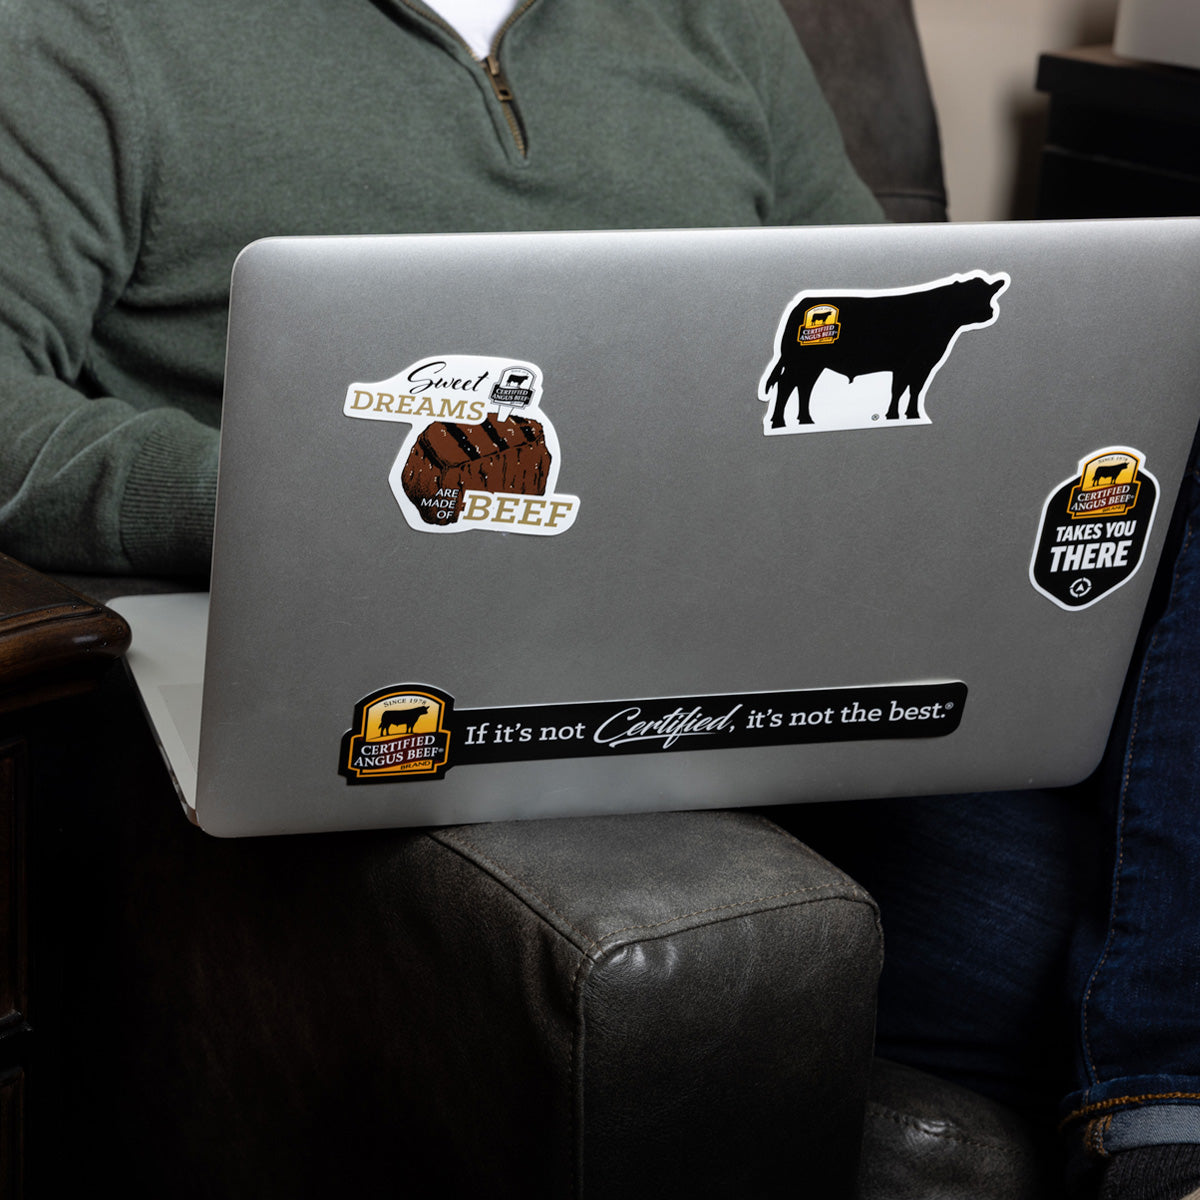 Sweet Dreams are Made of Beef Sticker